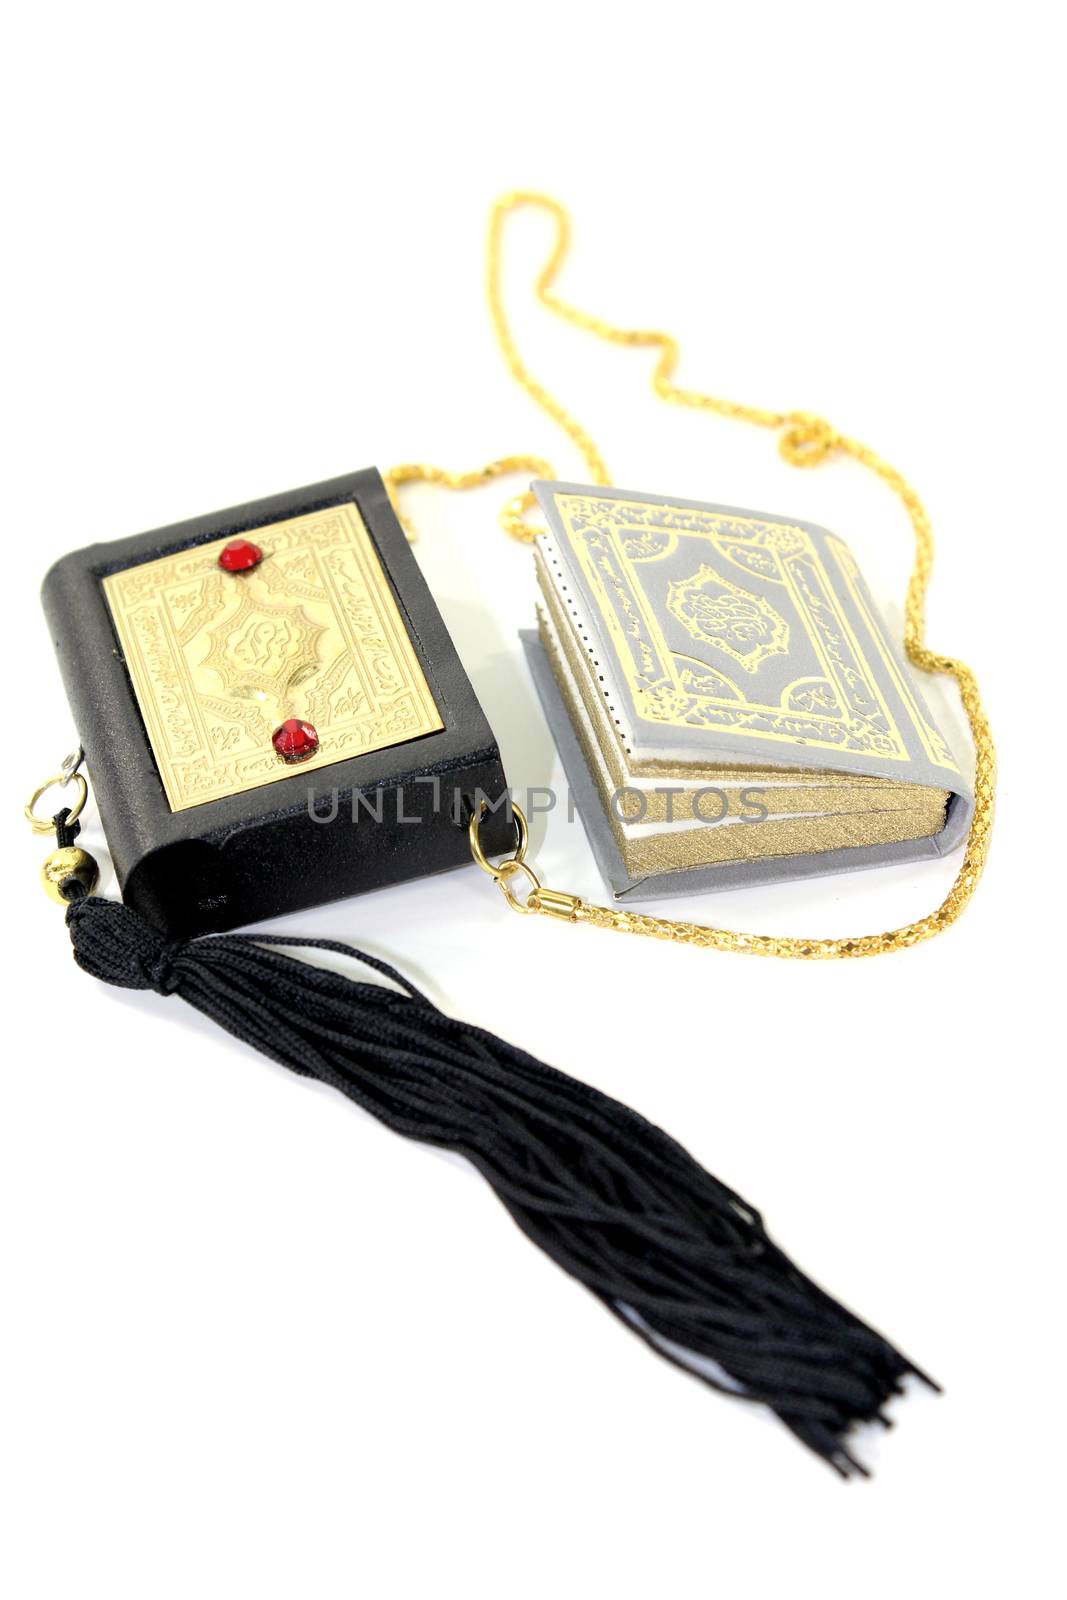 small Quran with Case before light background